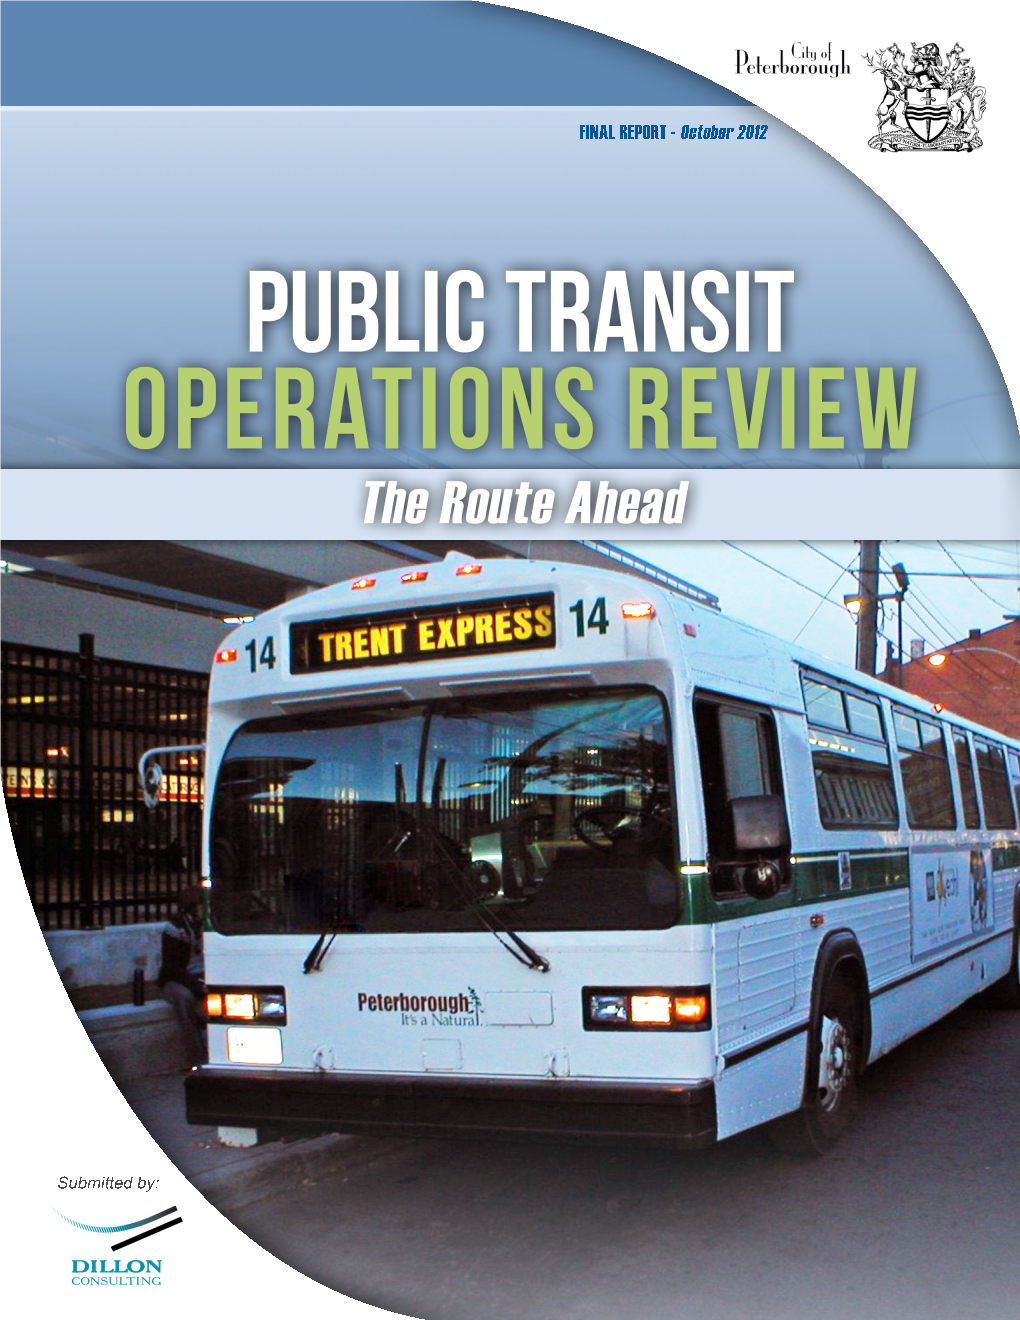 Public Transit Operations Review – the Route Ahead Executive Summary October 2012